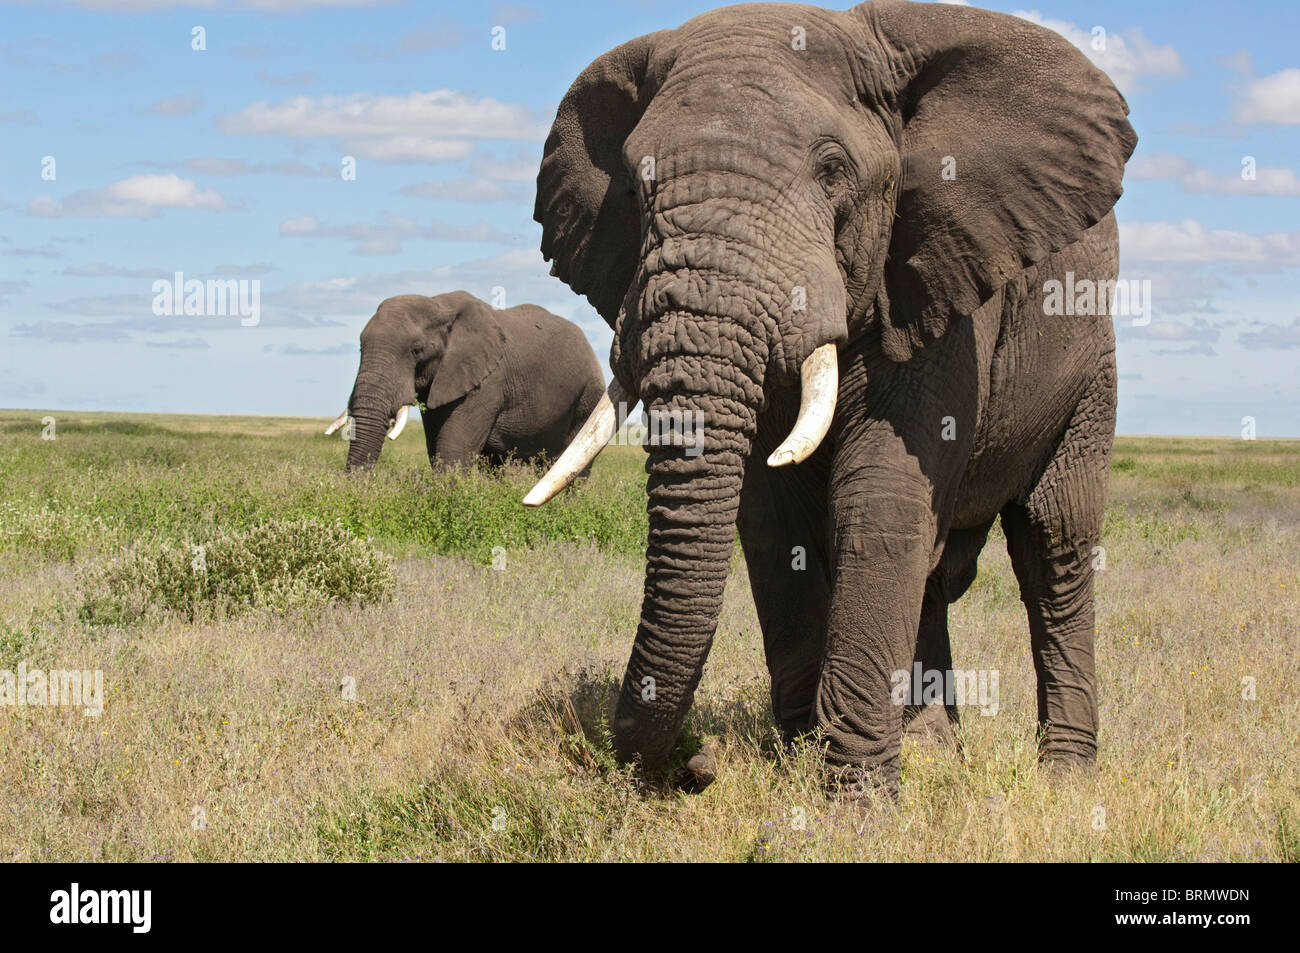 An Elephant with its trunk trailing on the ground and another standing in the background Stock Photo